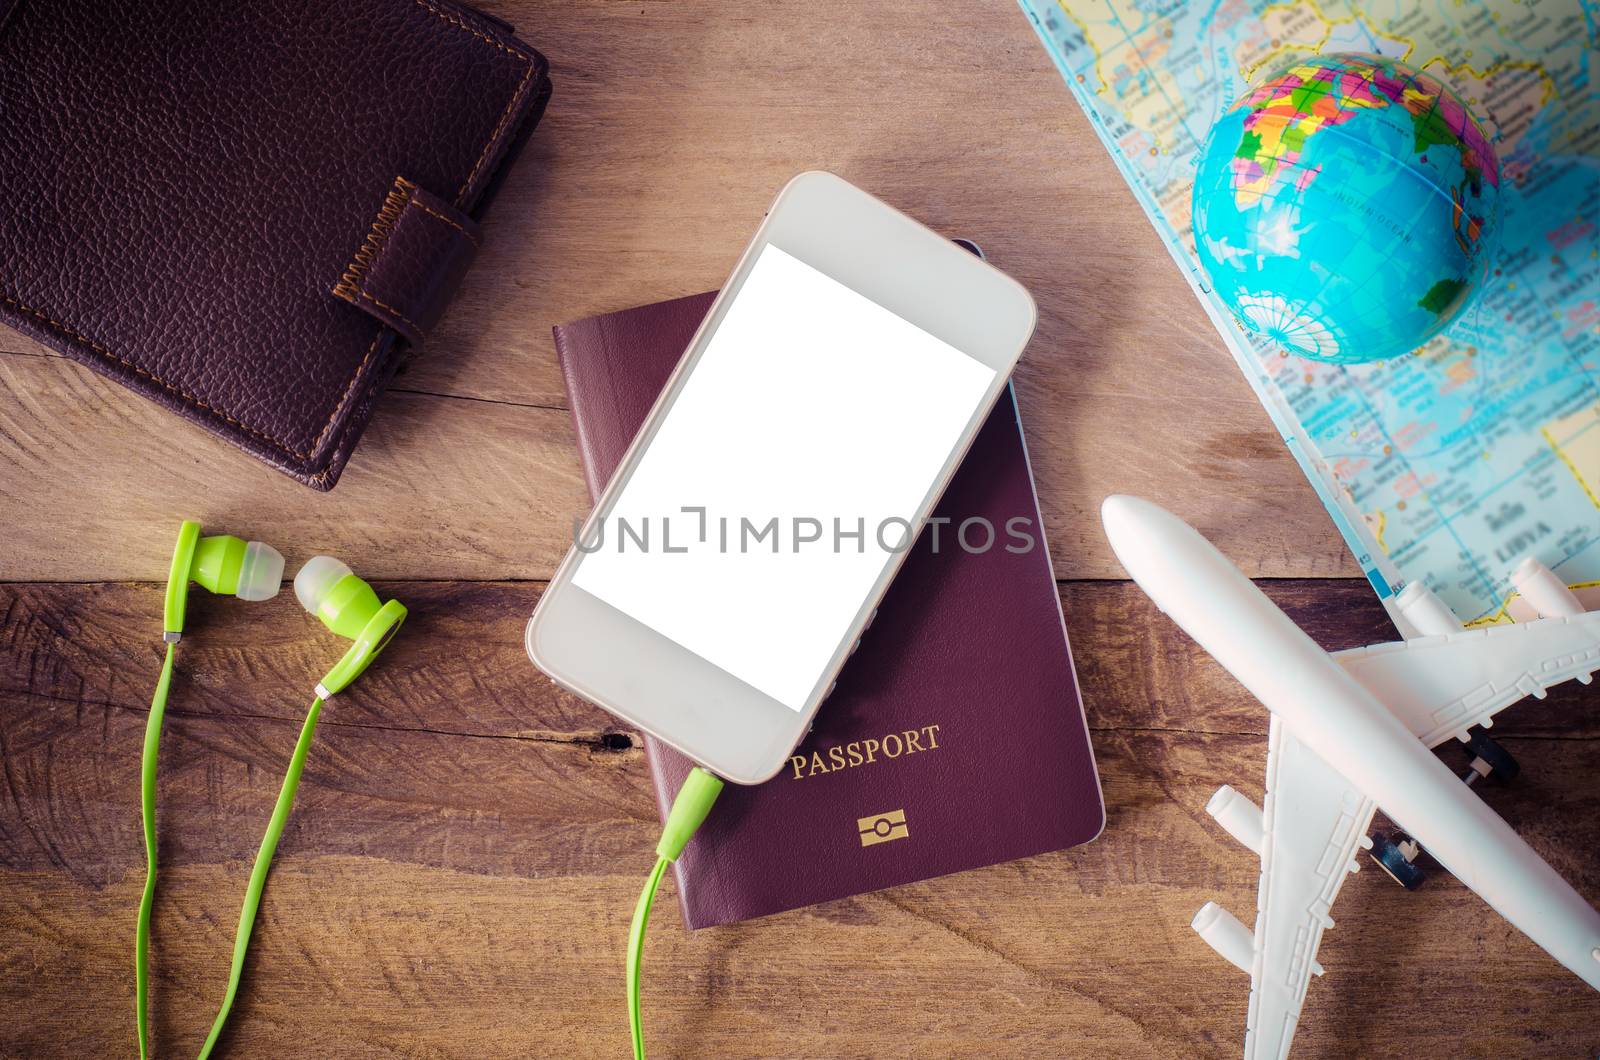 Travel accessories costumes. Passports, luggage, The cost of travel maps prepared for the trip by photobyphotoboy